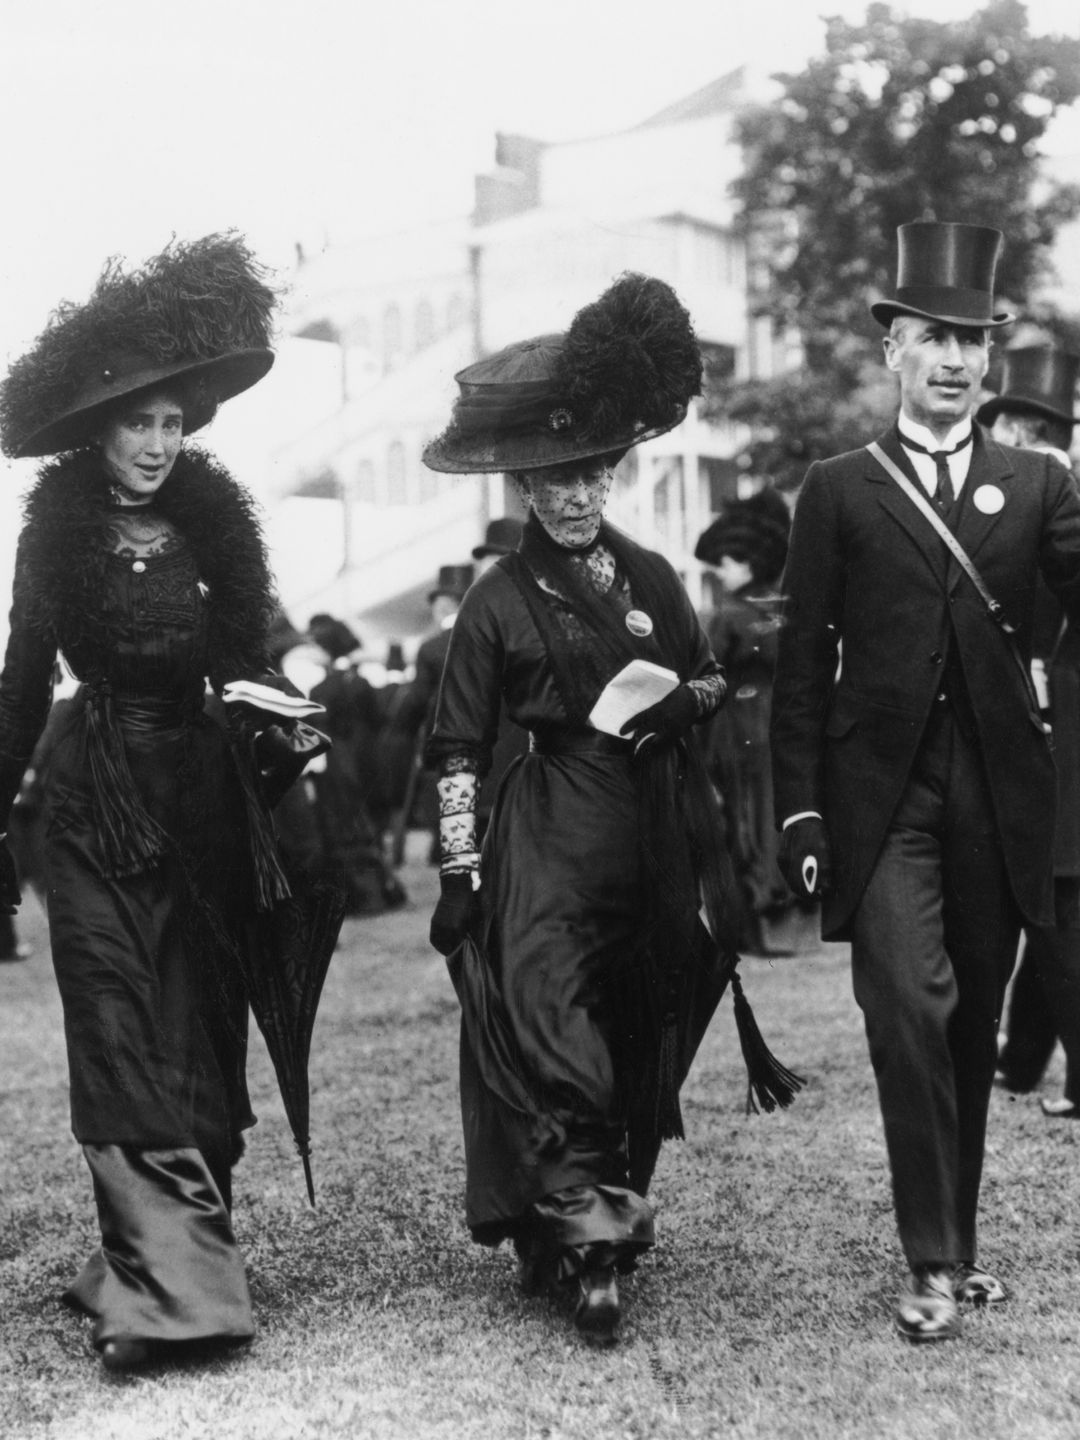 Spectators including the Marchioness of Camden at the Royal Ascot race meeting at Ascot Racecourse in Berkshire in June 1910. (Photo: Topical Press Agency/Getty Images)